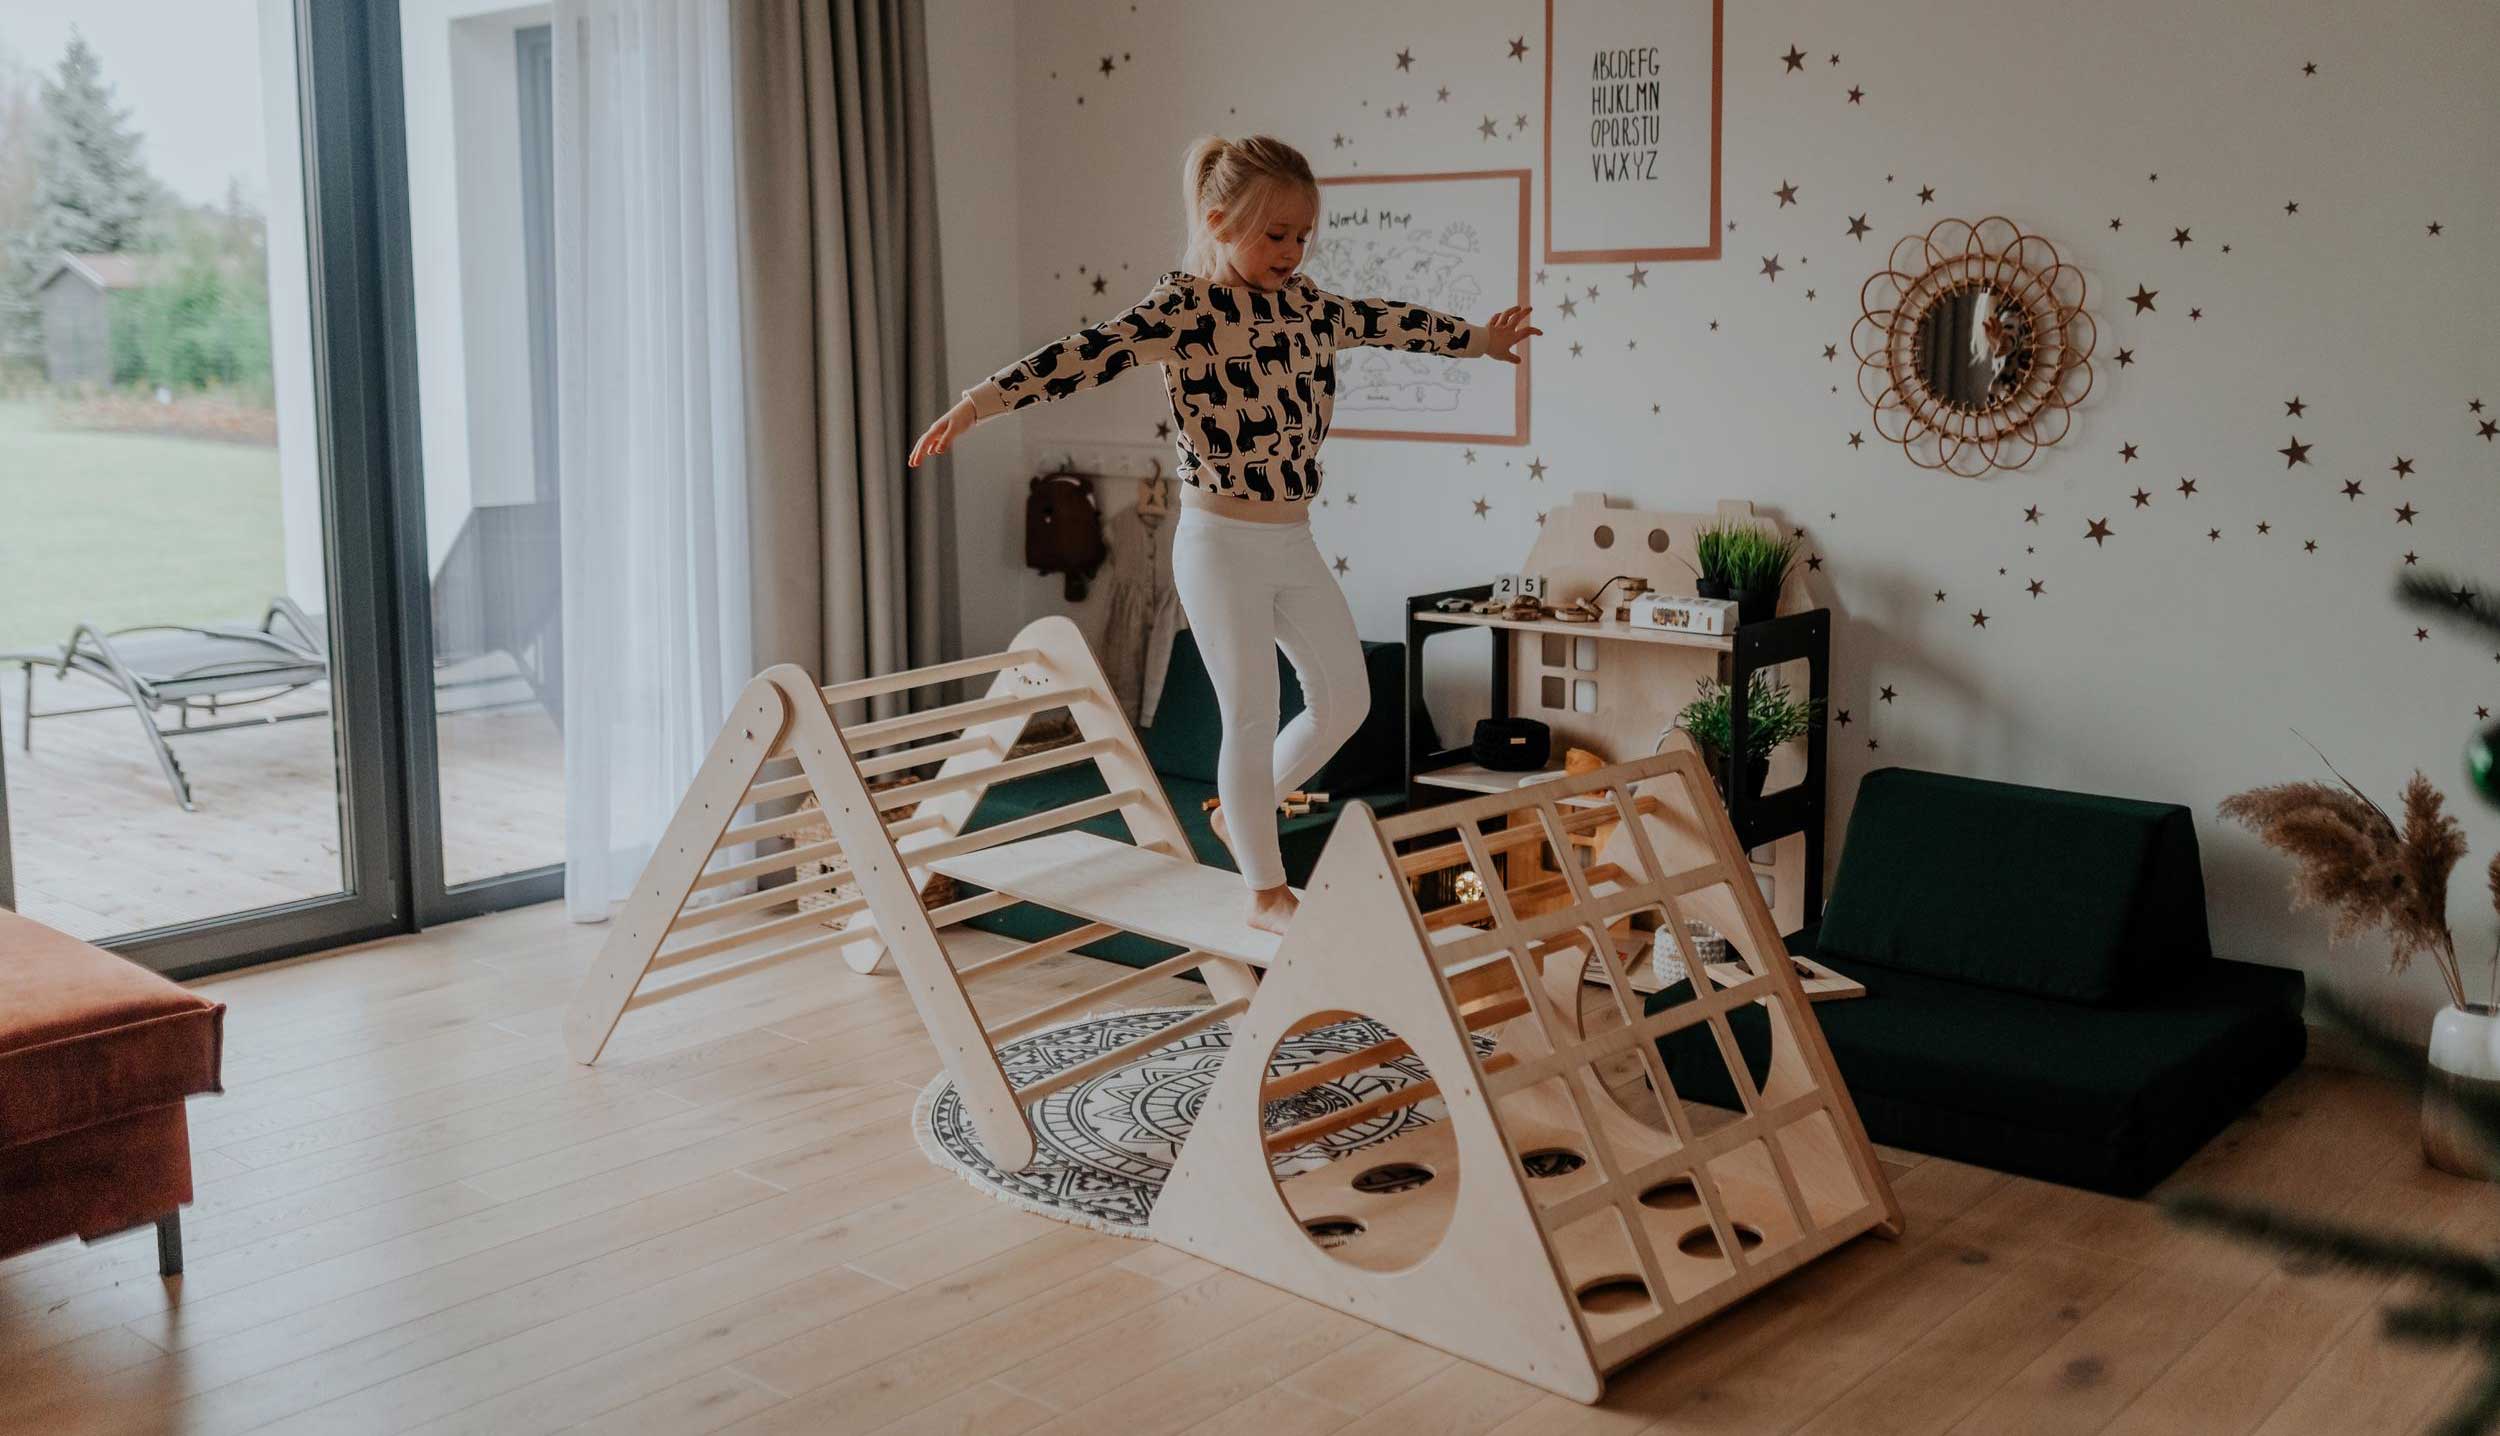 A girl is jumping on a wooden play set in a living room.